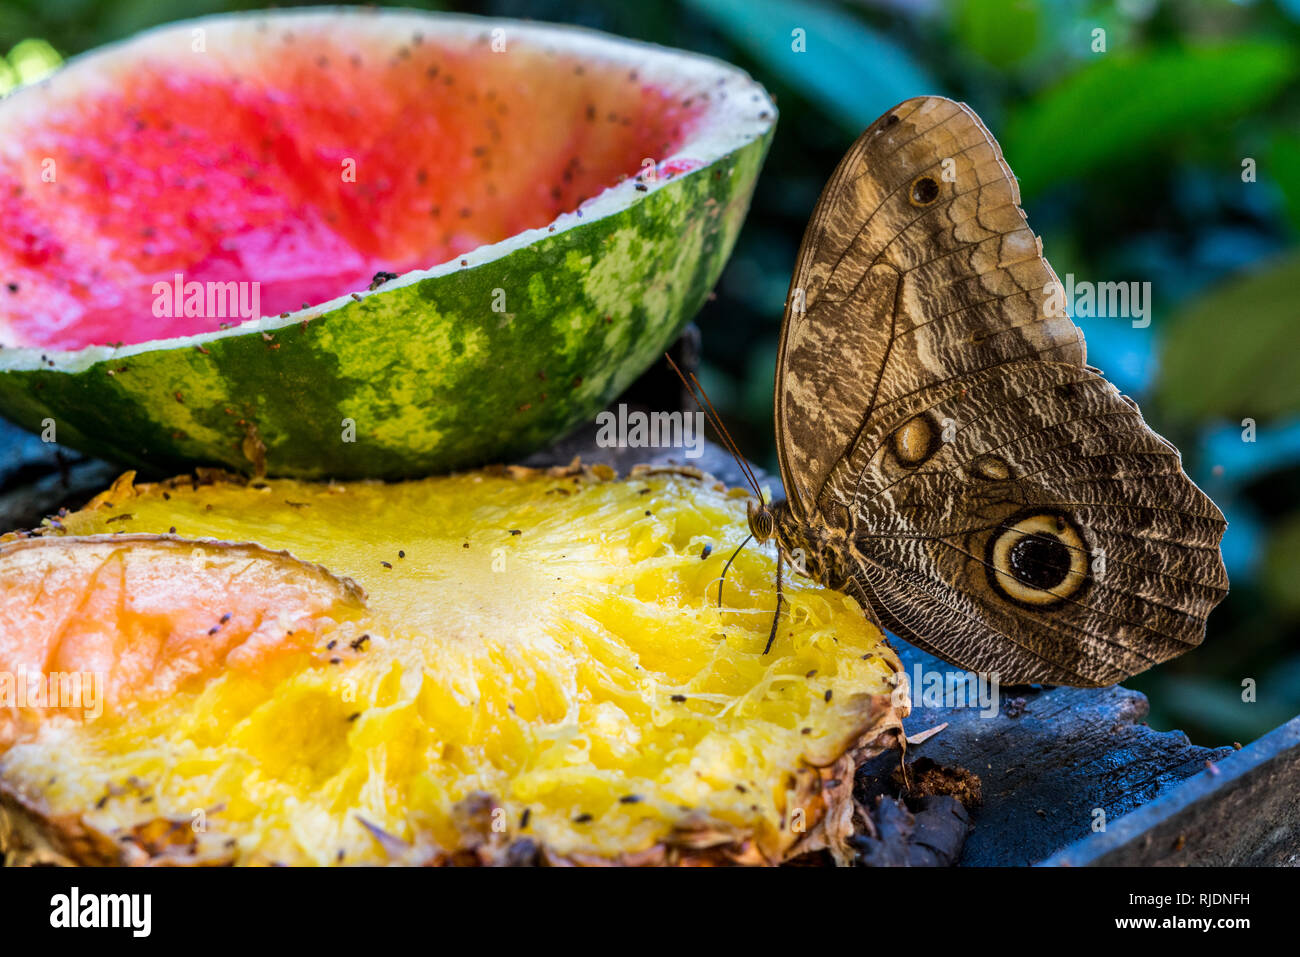 A nice colorful photo of a beautiful owl butterfly (Caligo spp) feeding on some fermenting pineapples and watermelon Stock Photo